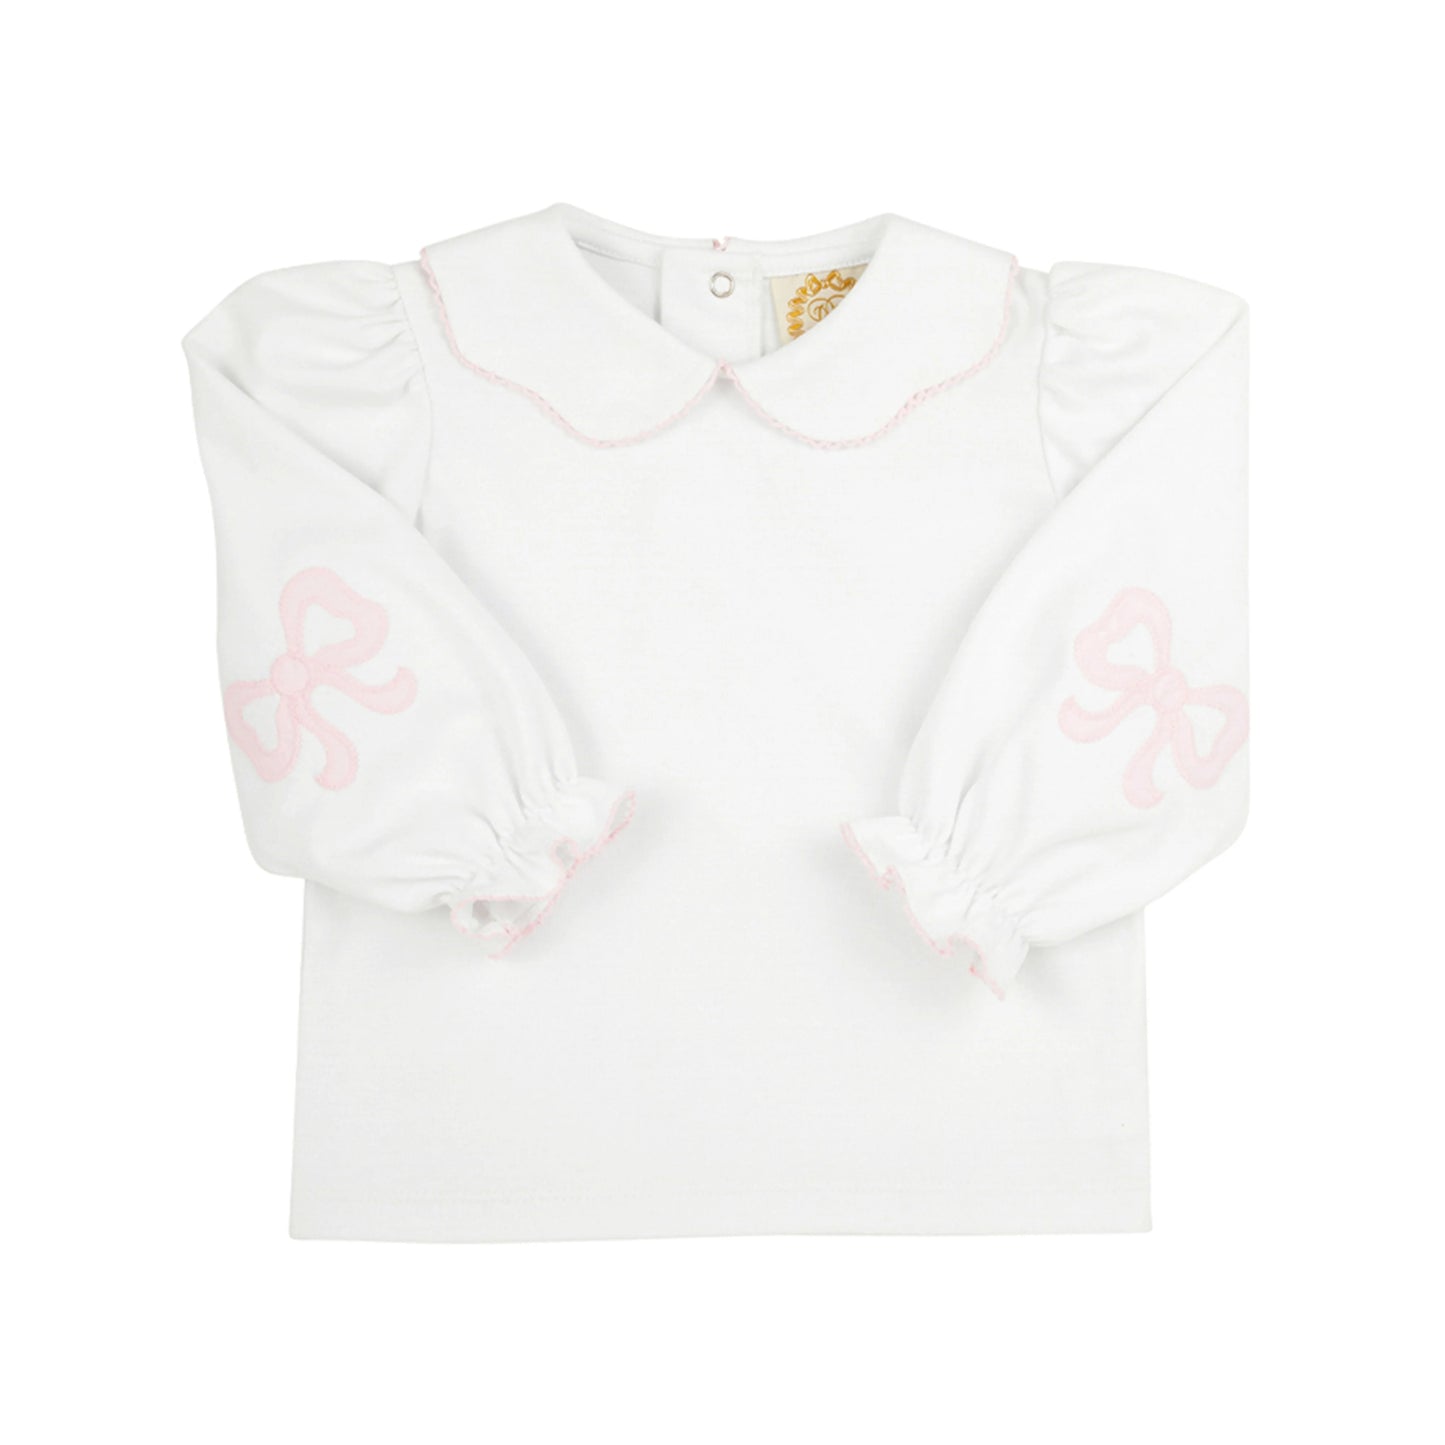 EMMA'S ELBOW PATCH TOP - WORTH AVENUE WHITE WITH PALM BEACH PIBK